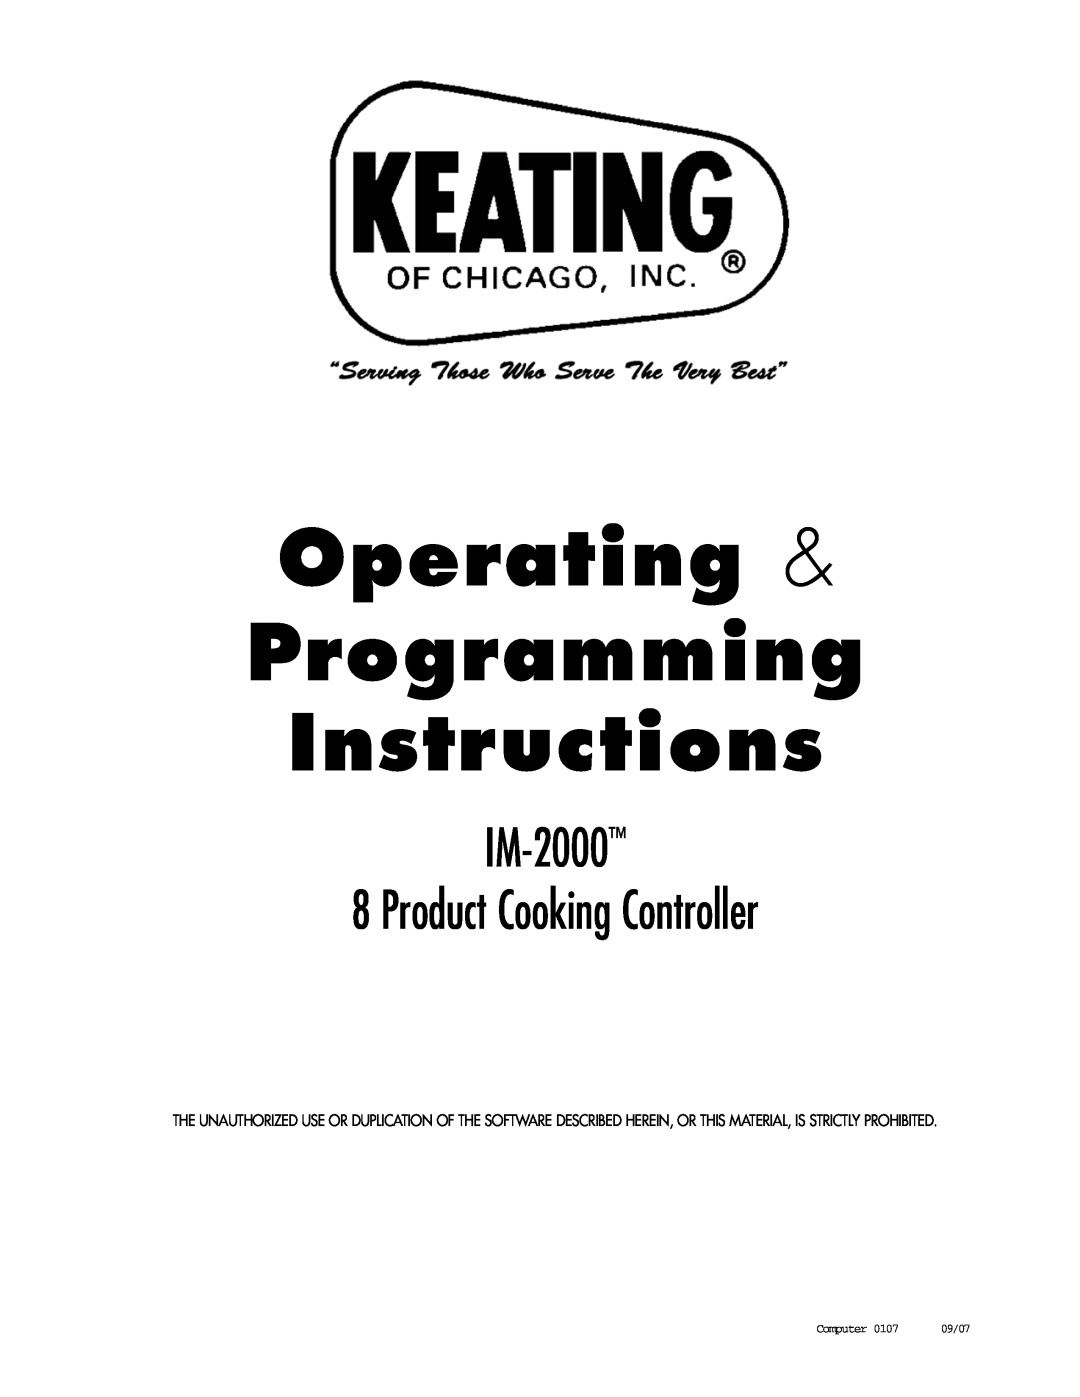 Keating Of Chicago manual Operating & Programming Instructions, IM-2000 8 Product Cooking Controller, Computer, 09/07 